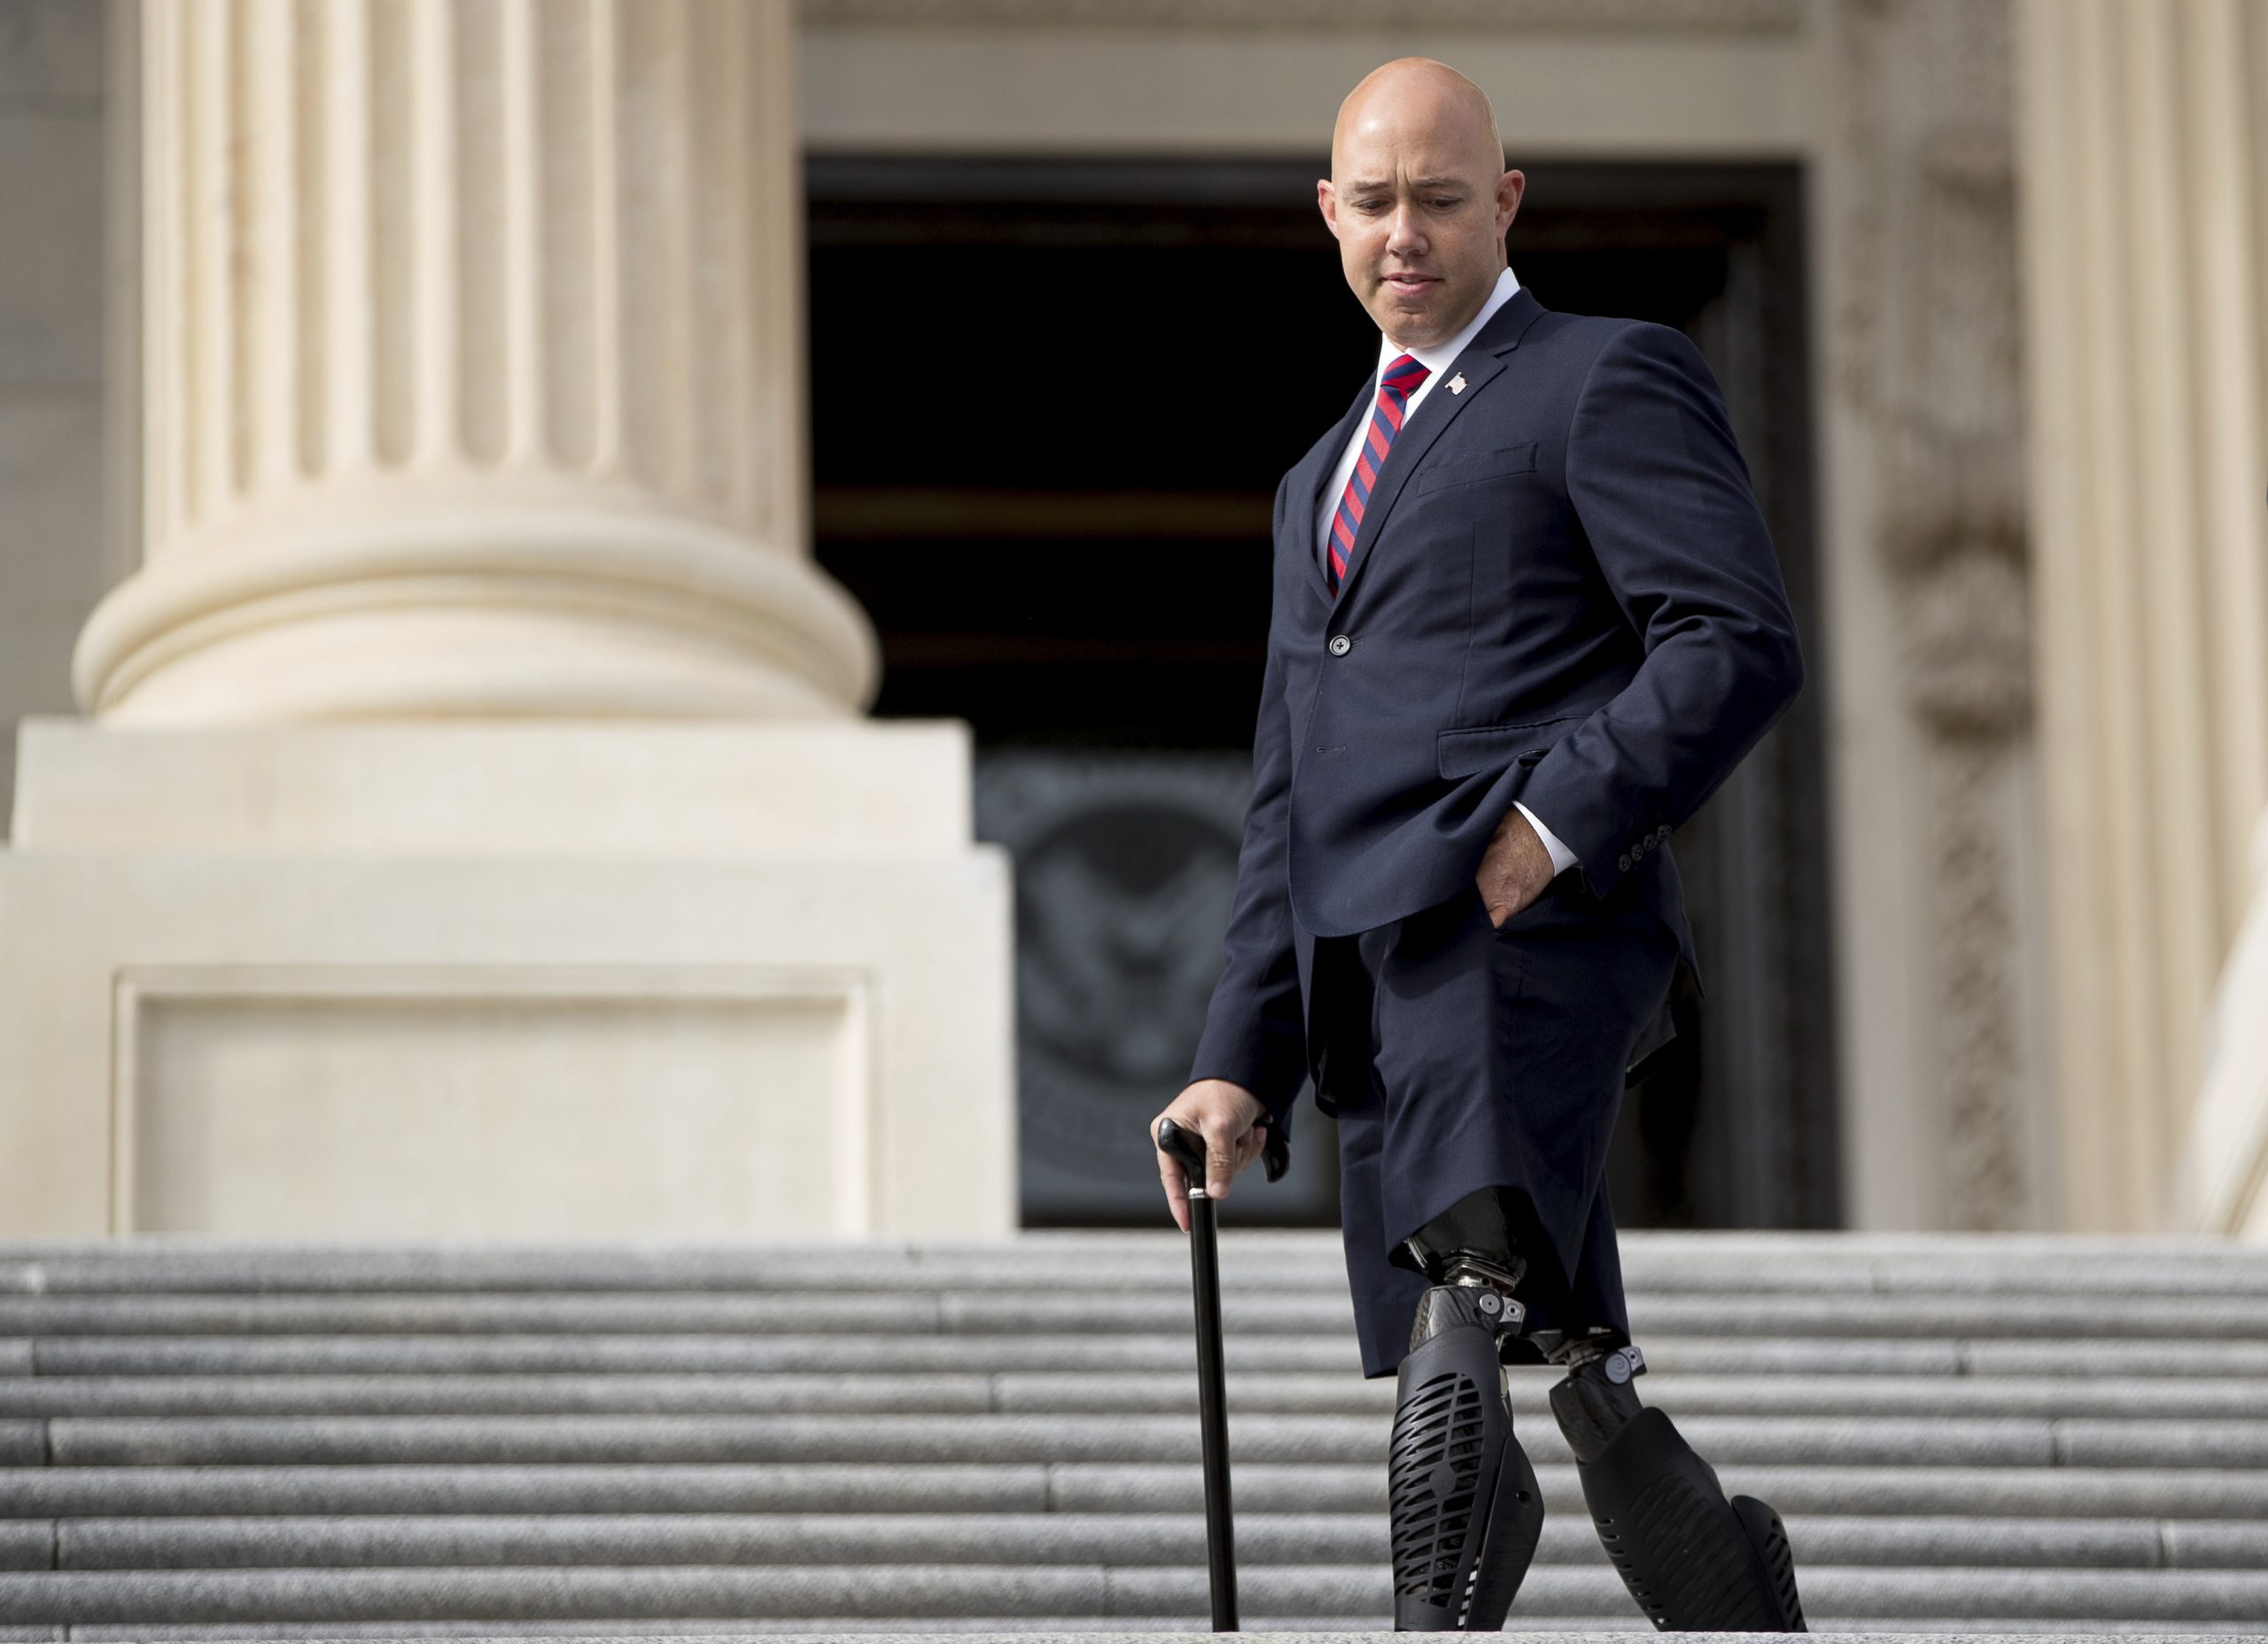 "The federal government has played a big part in causing these discharges, but they aren't taking responsibility for the damage caused to our community. That's absolutely unacceptable, and it's why I introduced the Federal Do No Harm Act to hold the government accountable for their actions," said Rep. Brian Mast, R-Fla. (AP Photo/Andrew Harnik)